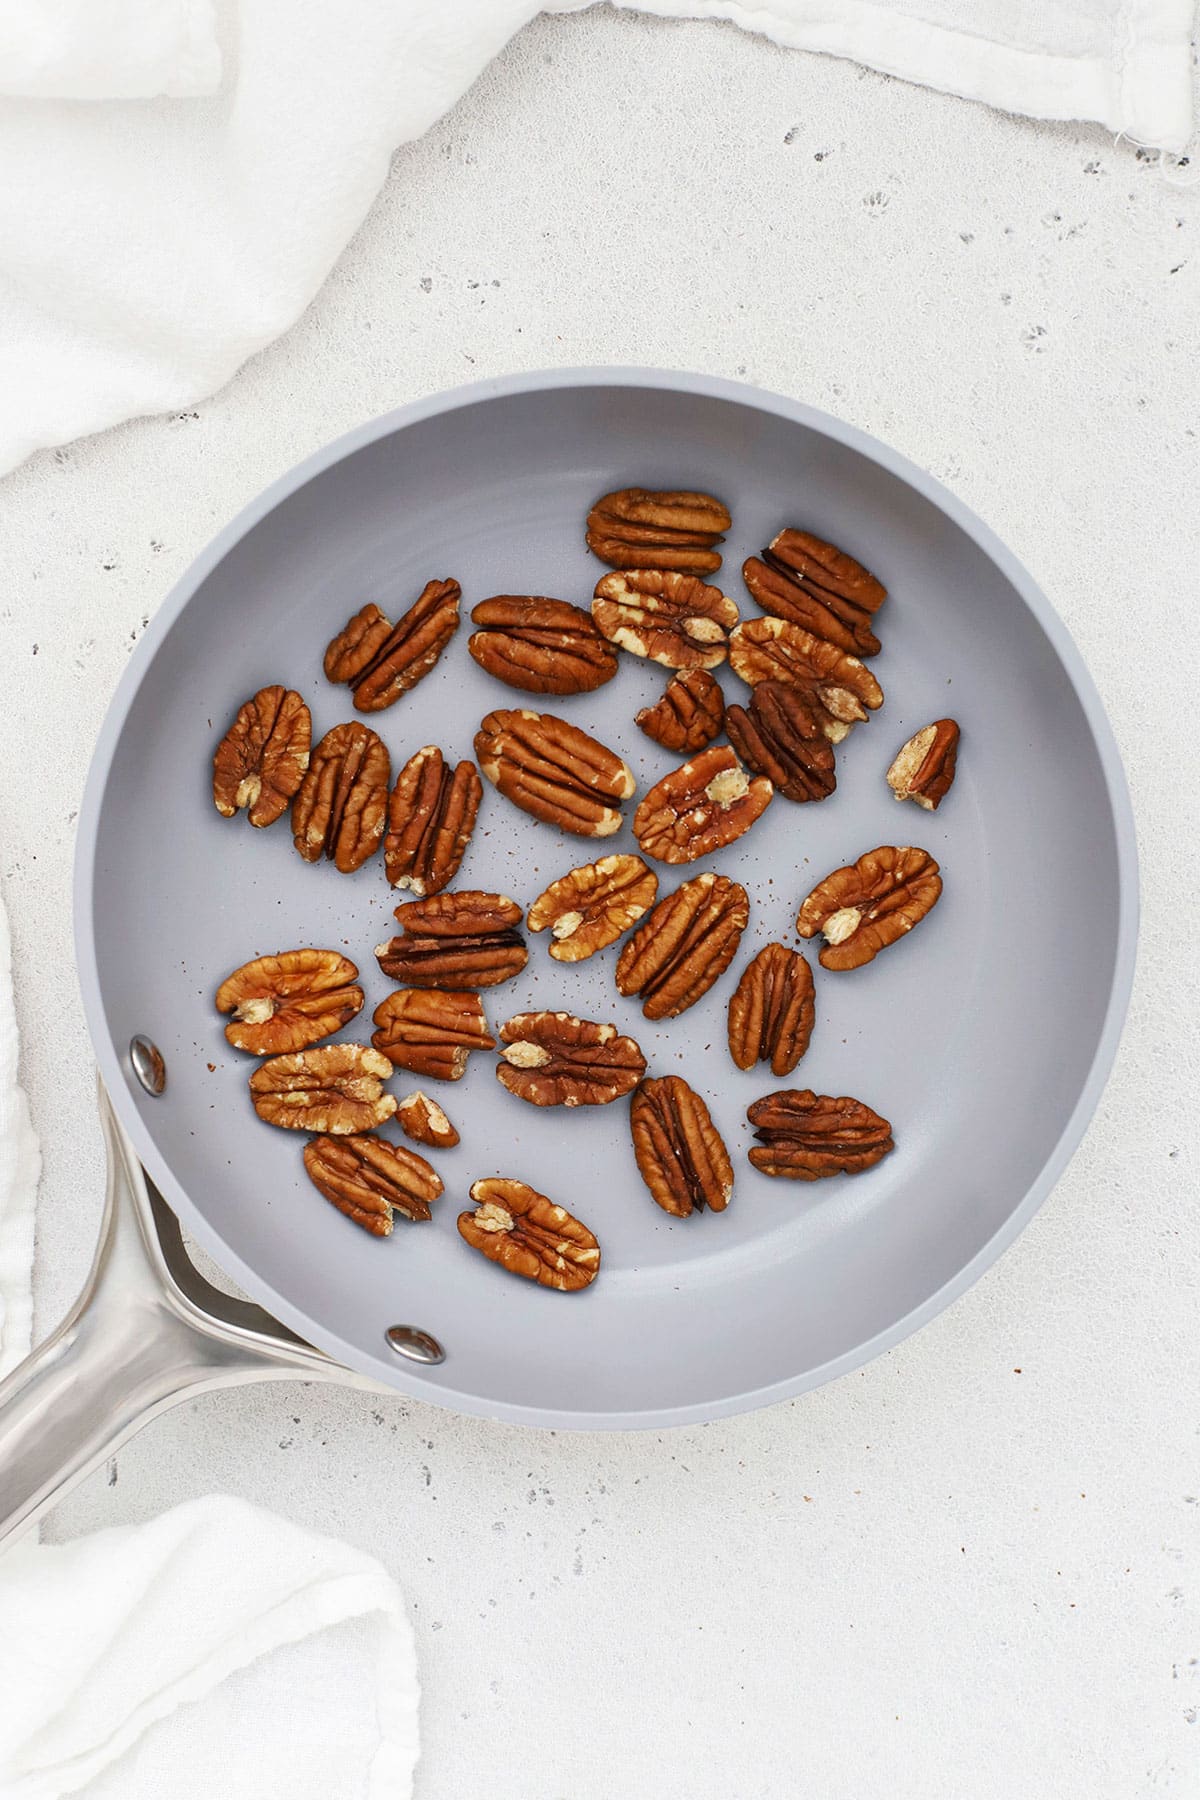 Toasting pecans in a pan on the stove